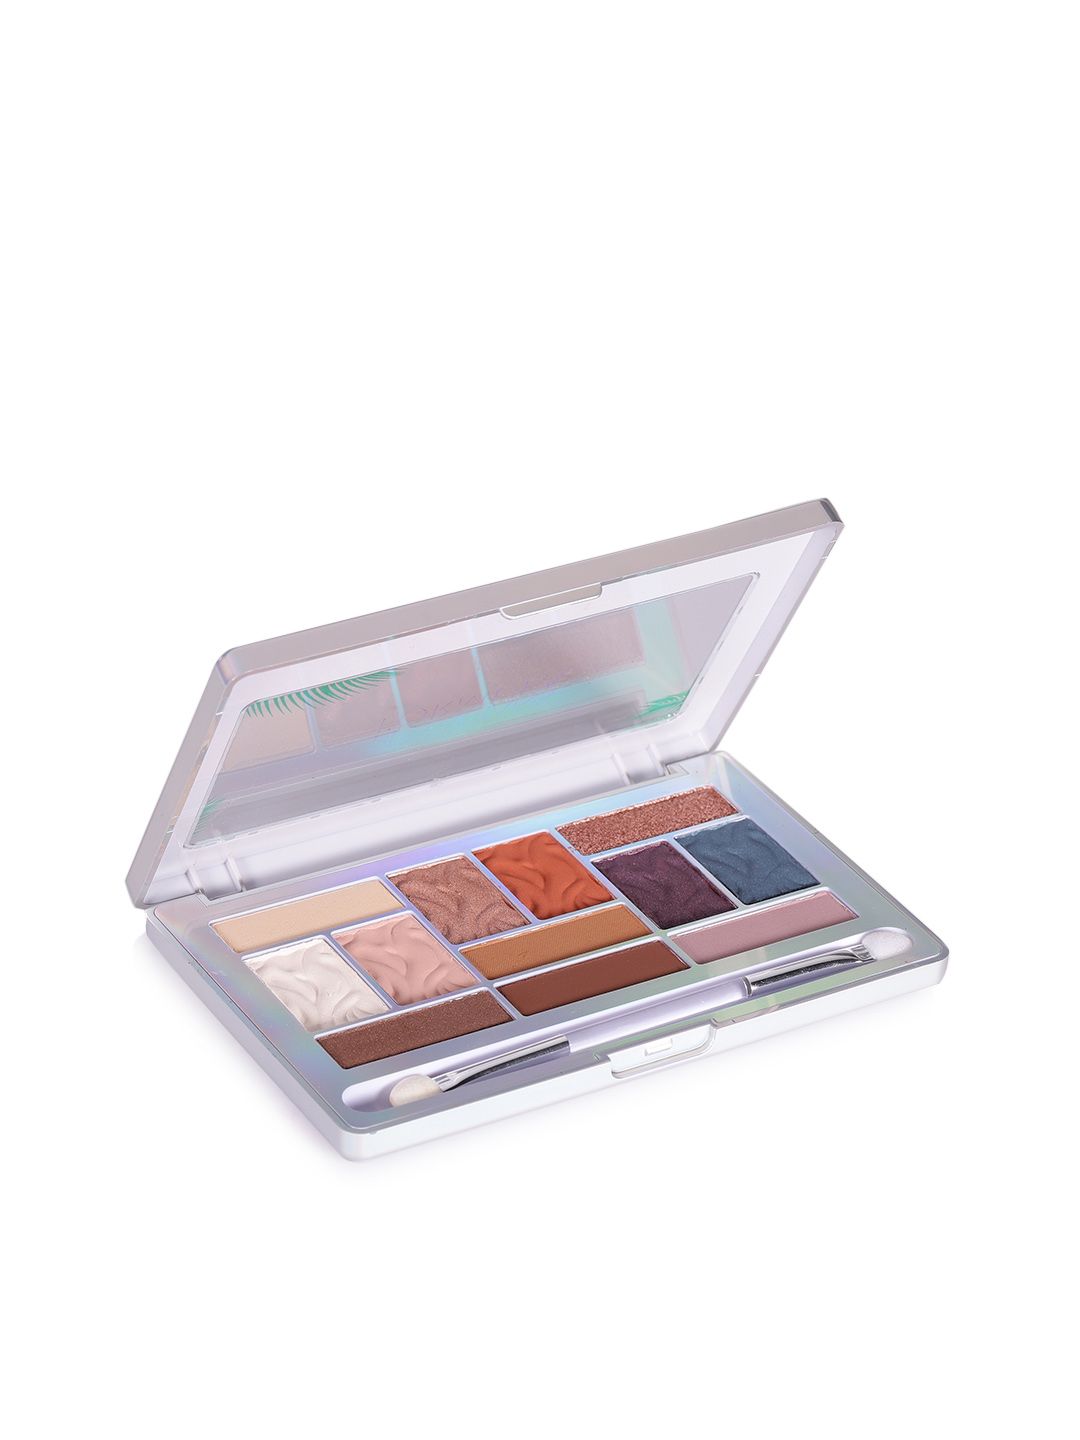 Physicians Formula Tropical Days Butter Eyeshadow Palette 15.6 g Price in India